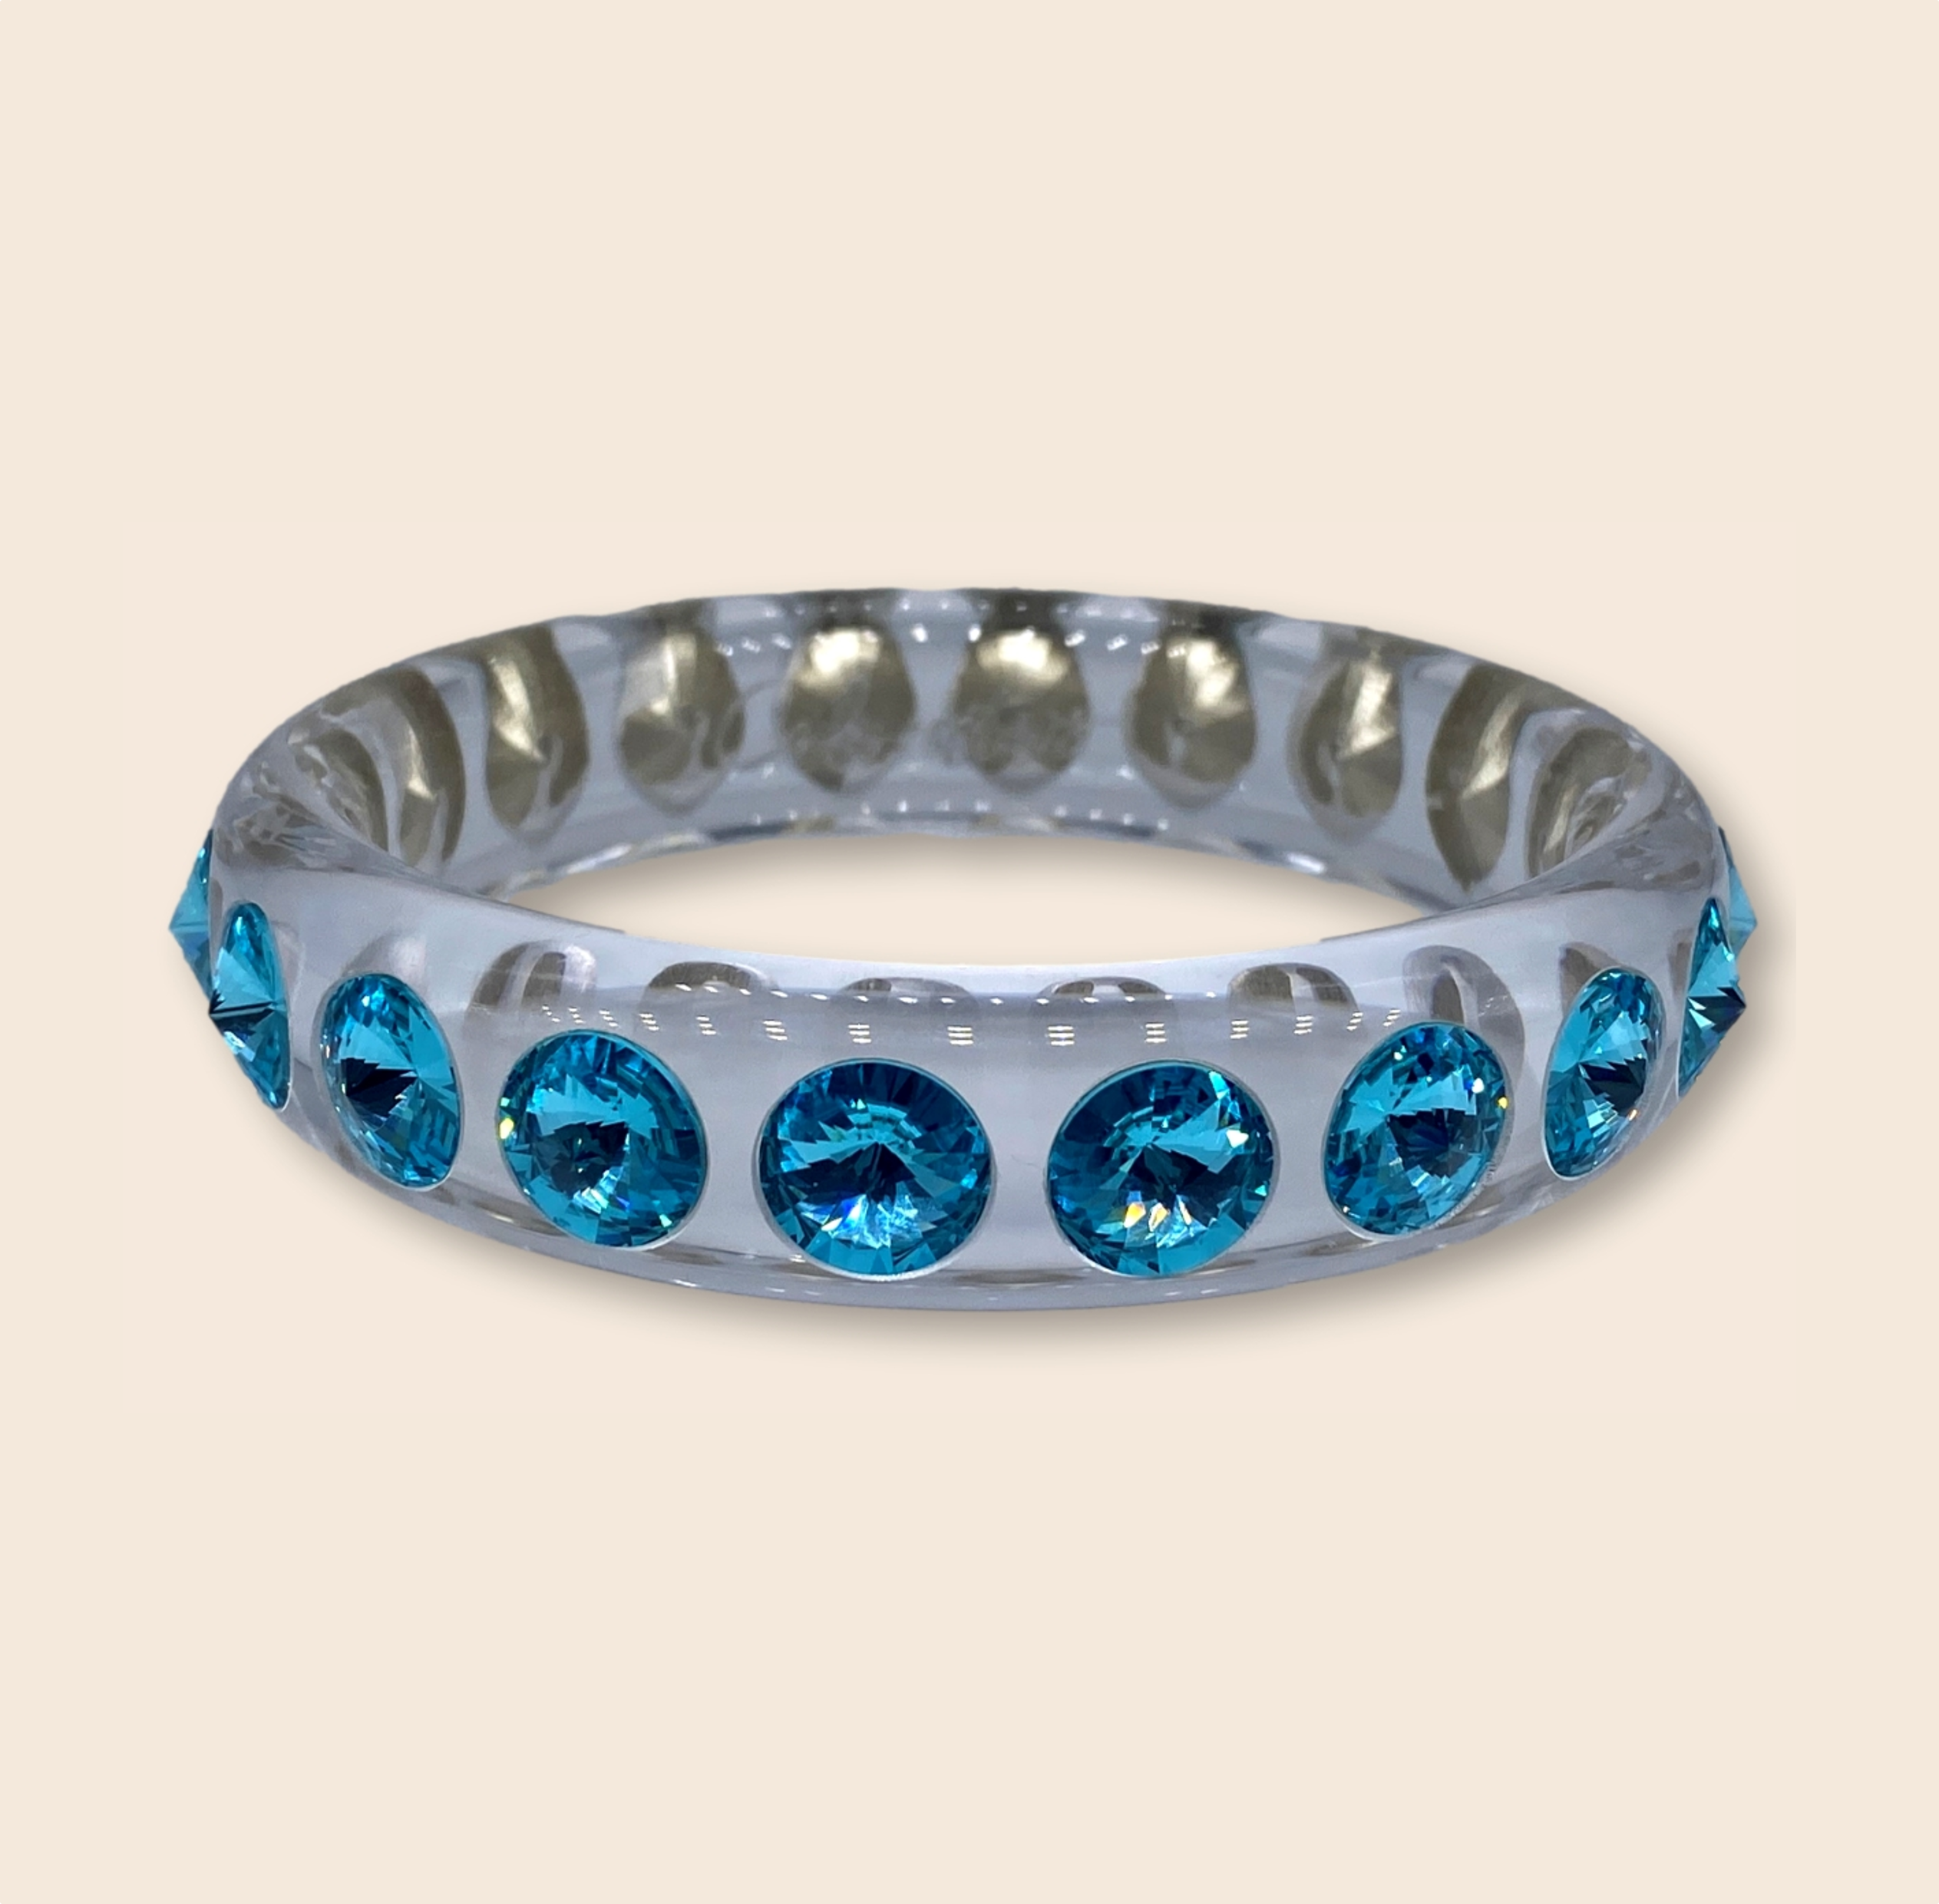 Classico bangle Sassari in transparent with accents in turquoise